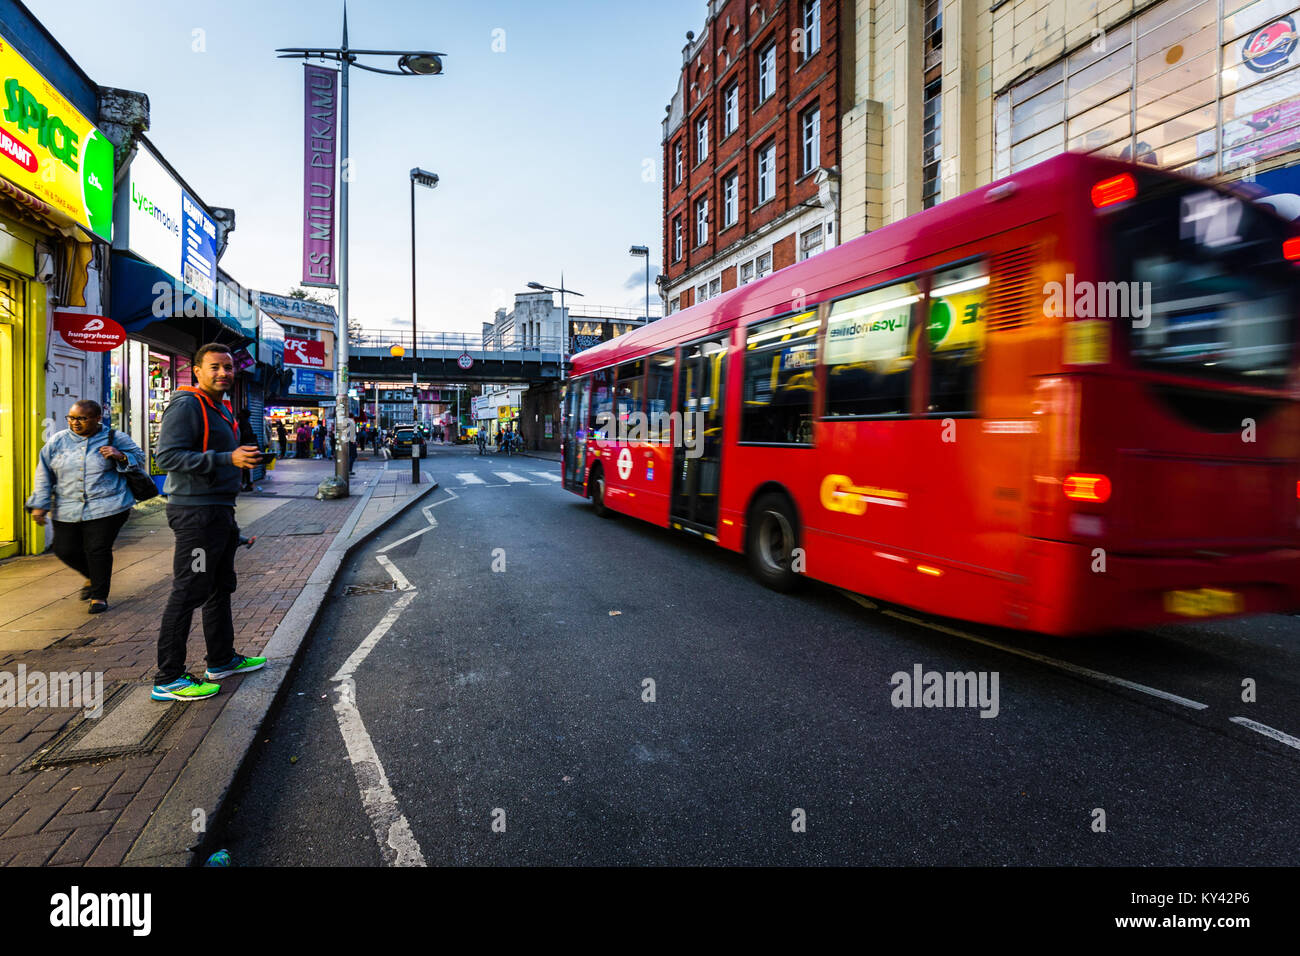 Street scene in Peckham, London, with red bus Stock Photo